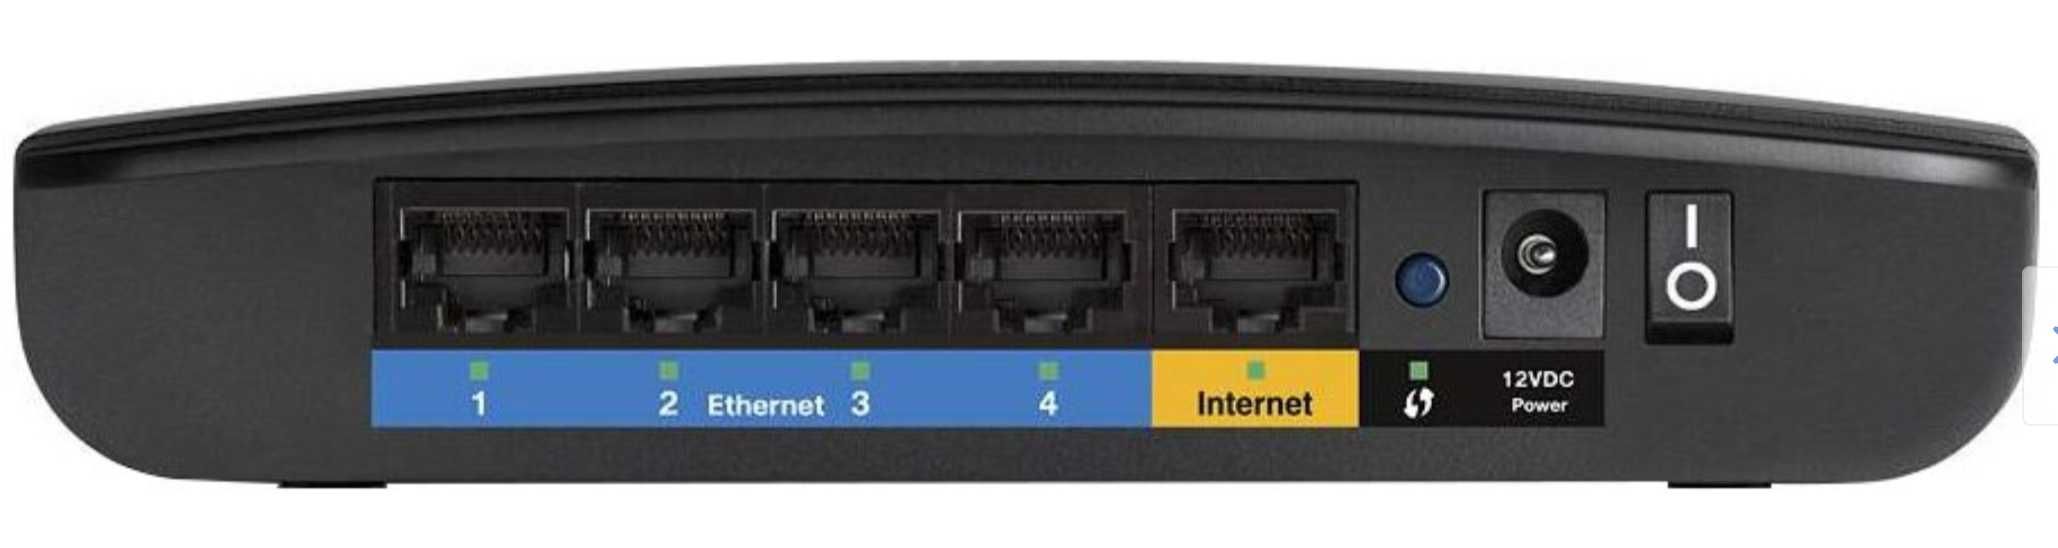 Router Linksys E 1200 N